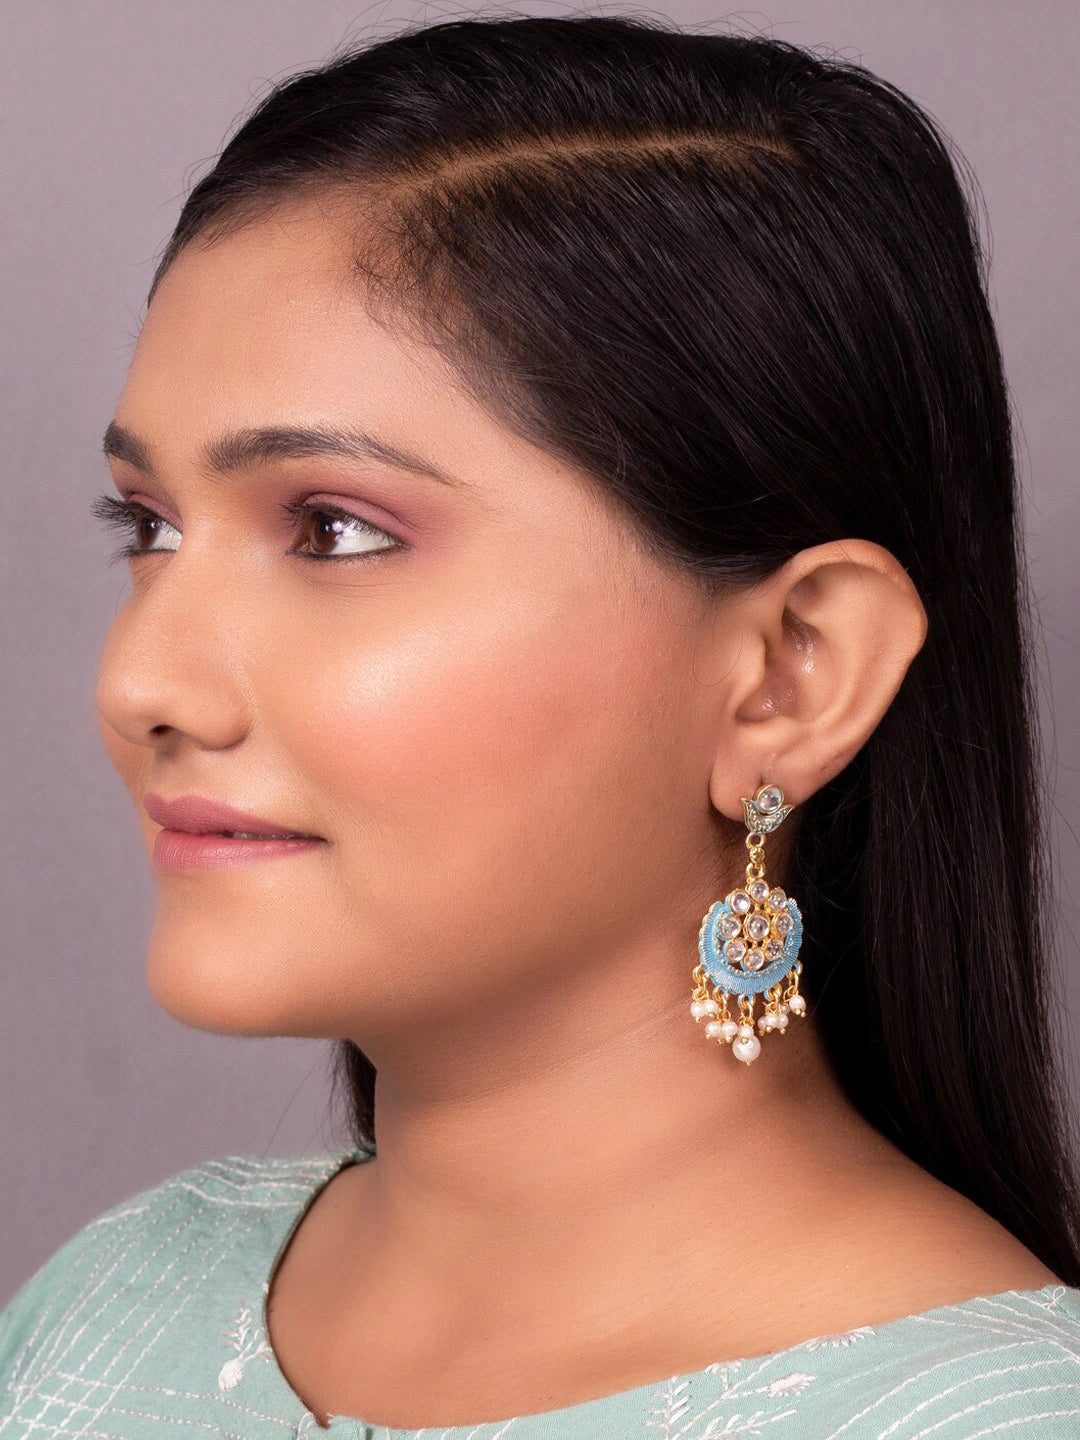 Women's Gold-Plated & Blue Contemporary Drop Earrings - Morkanth